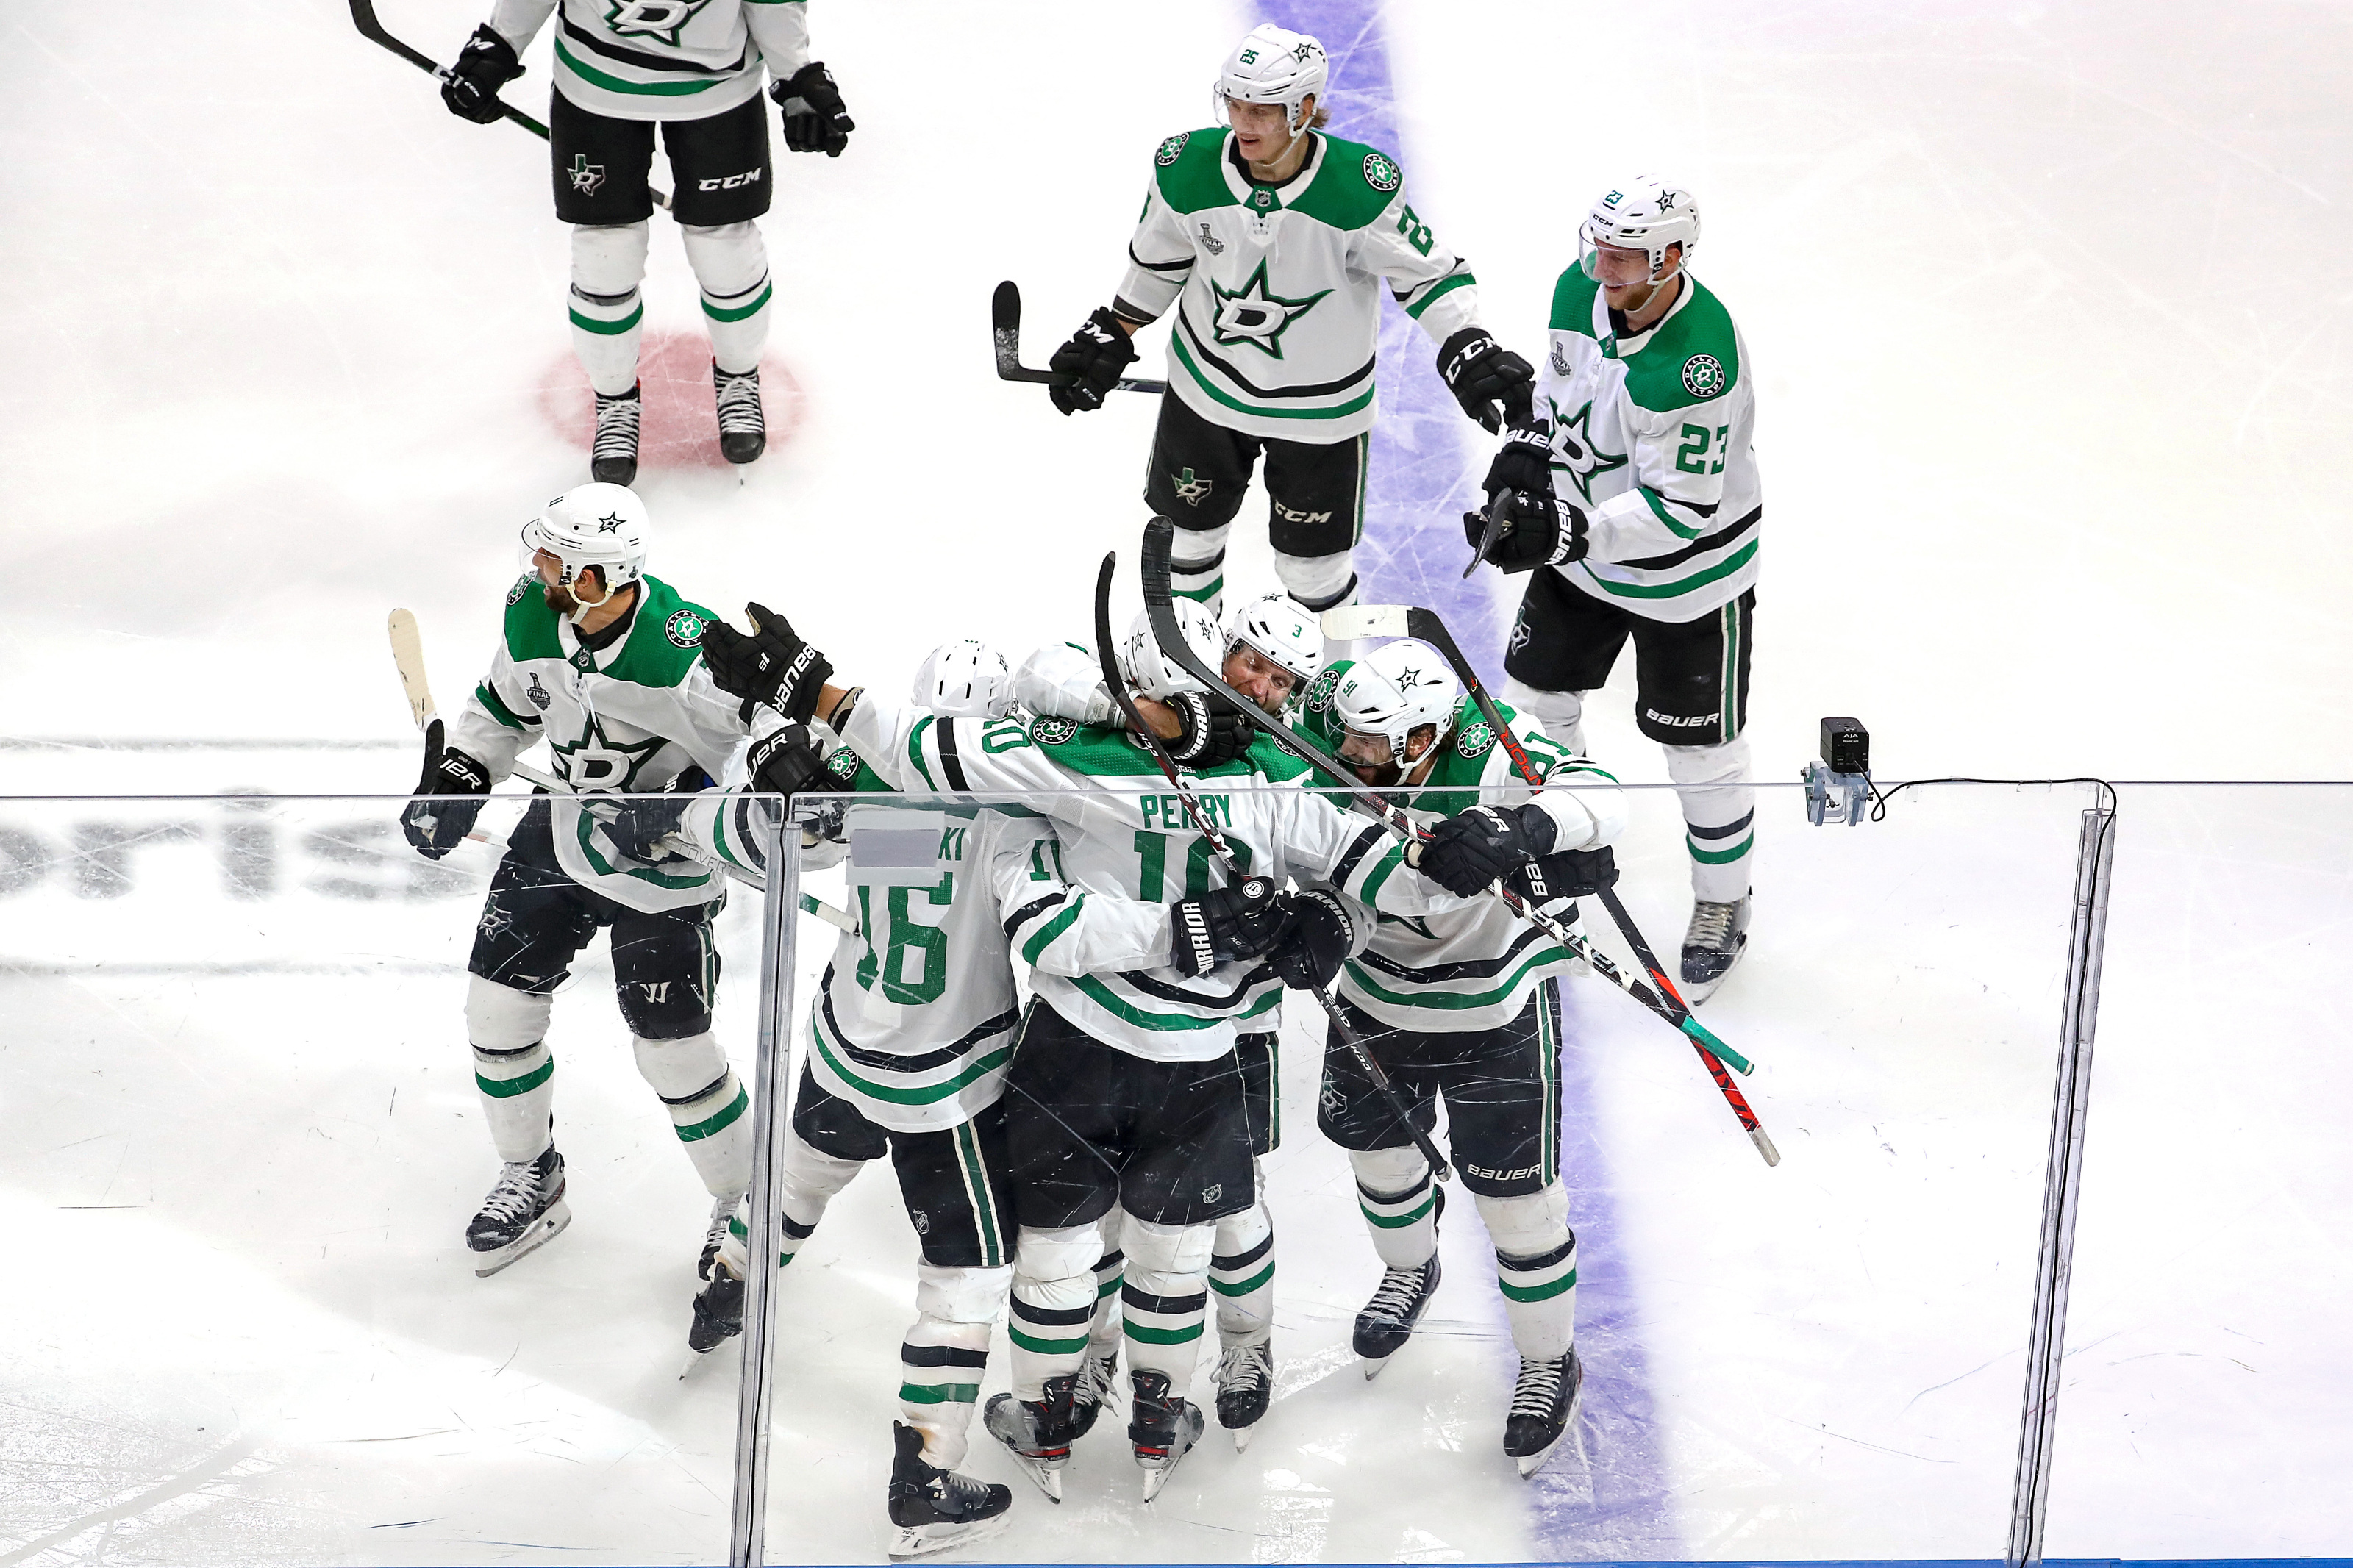 Perry, Pavelski and Stars force a Game 6 of the Stanley Cup Final